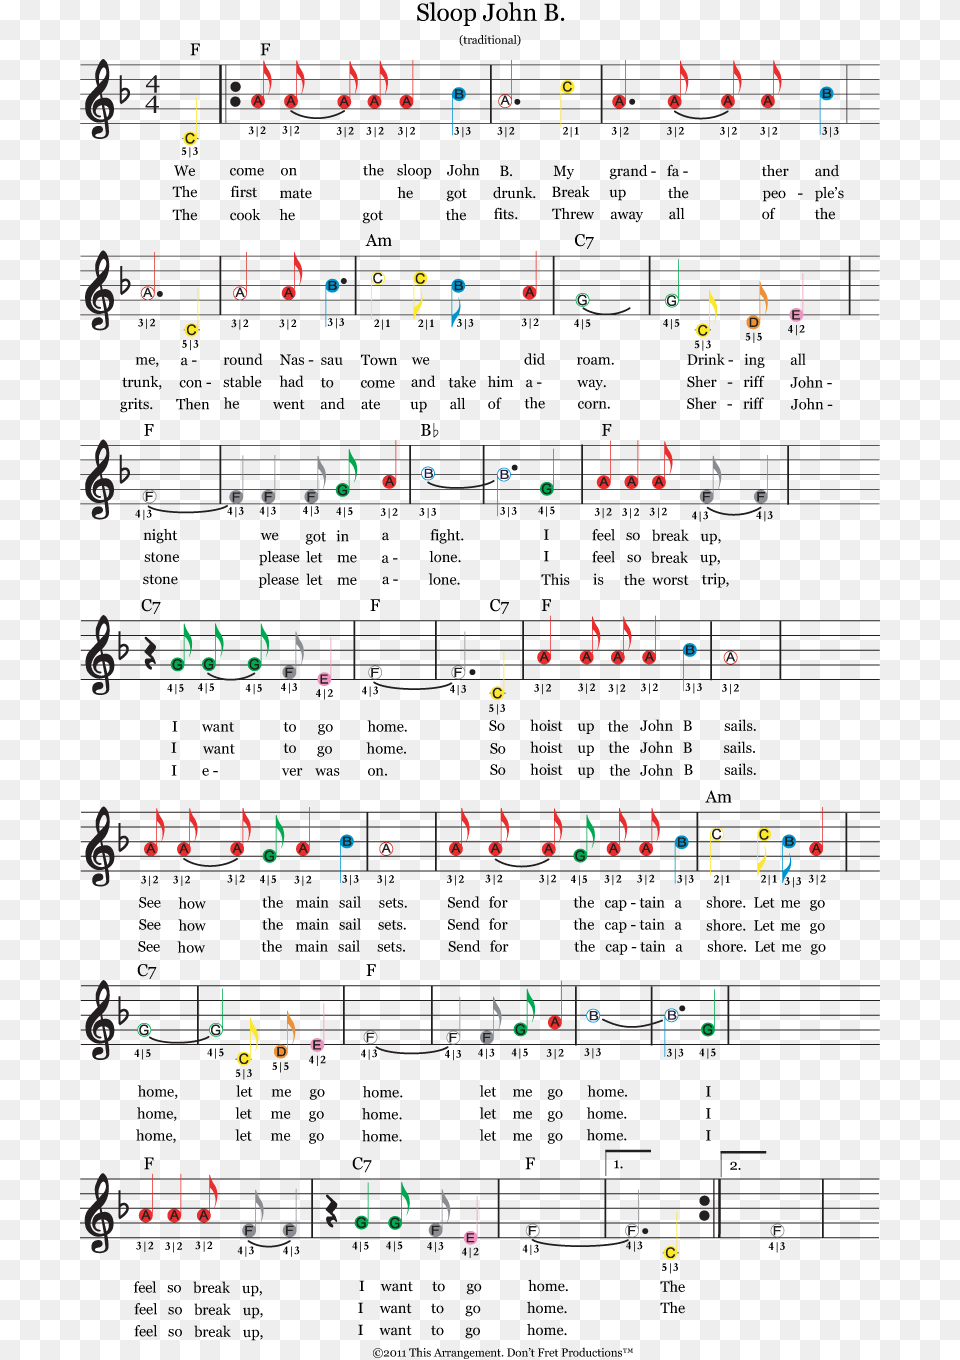 Easy Guitar Sheet Music For Sloop John B Featuring Guitar Notes For Songs, Scoreboard Free Png